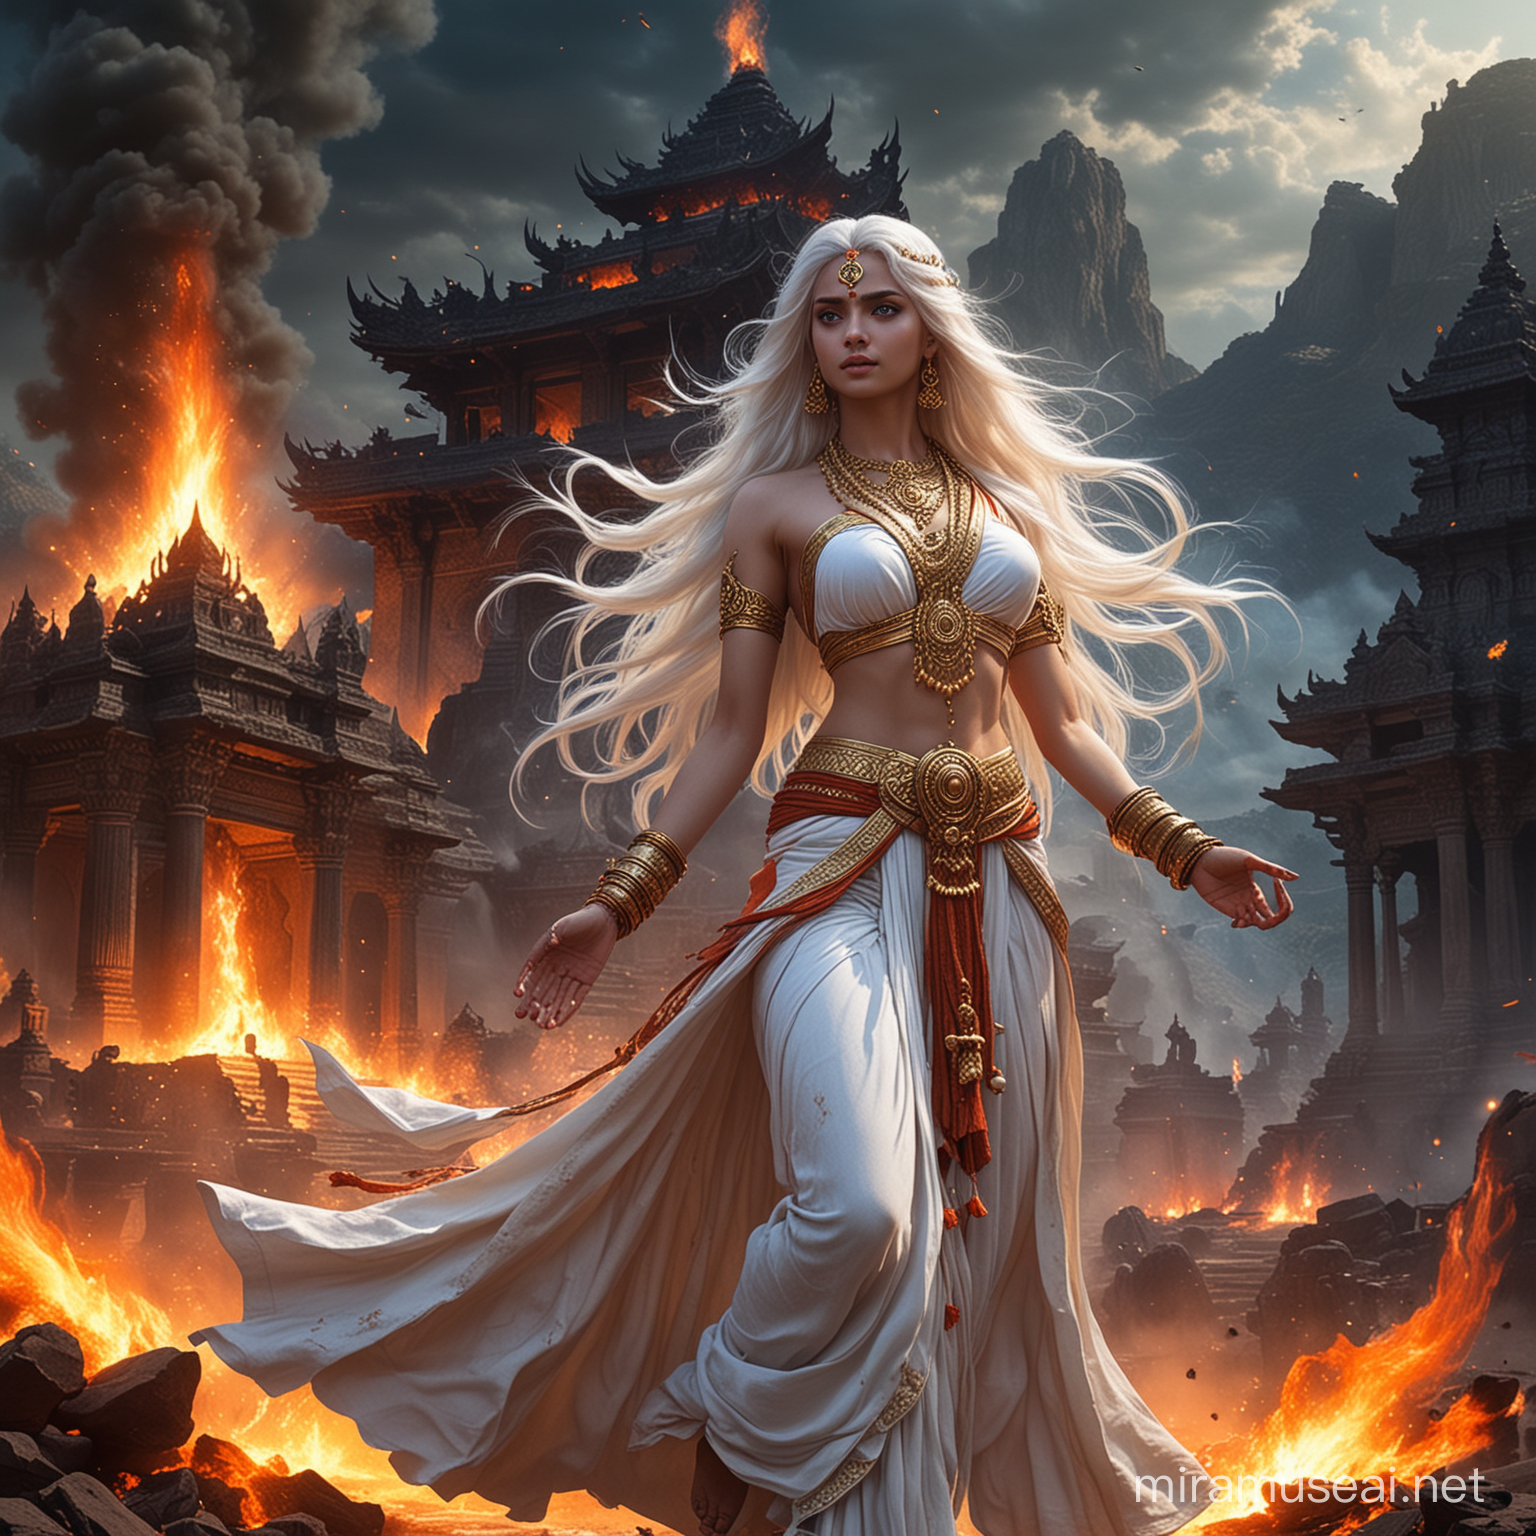 Young Empress Goddess in Hindu Combat Meditation with Surrounding Fire and Cosmic Energy